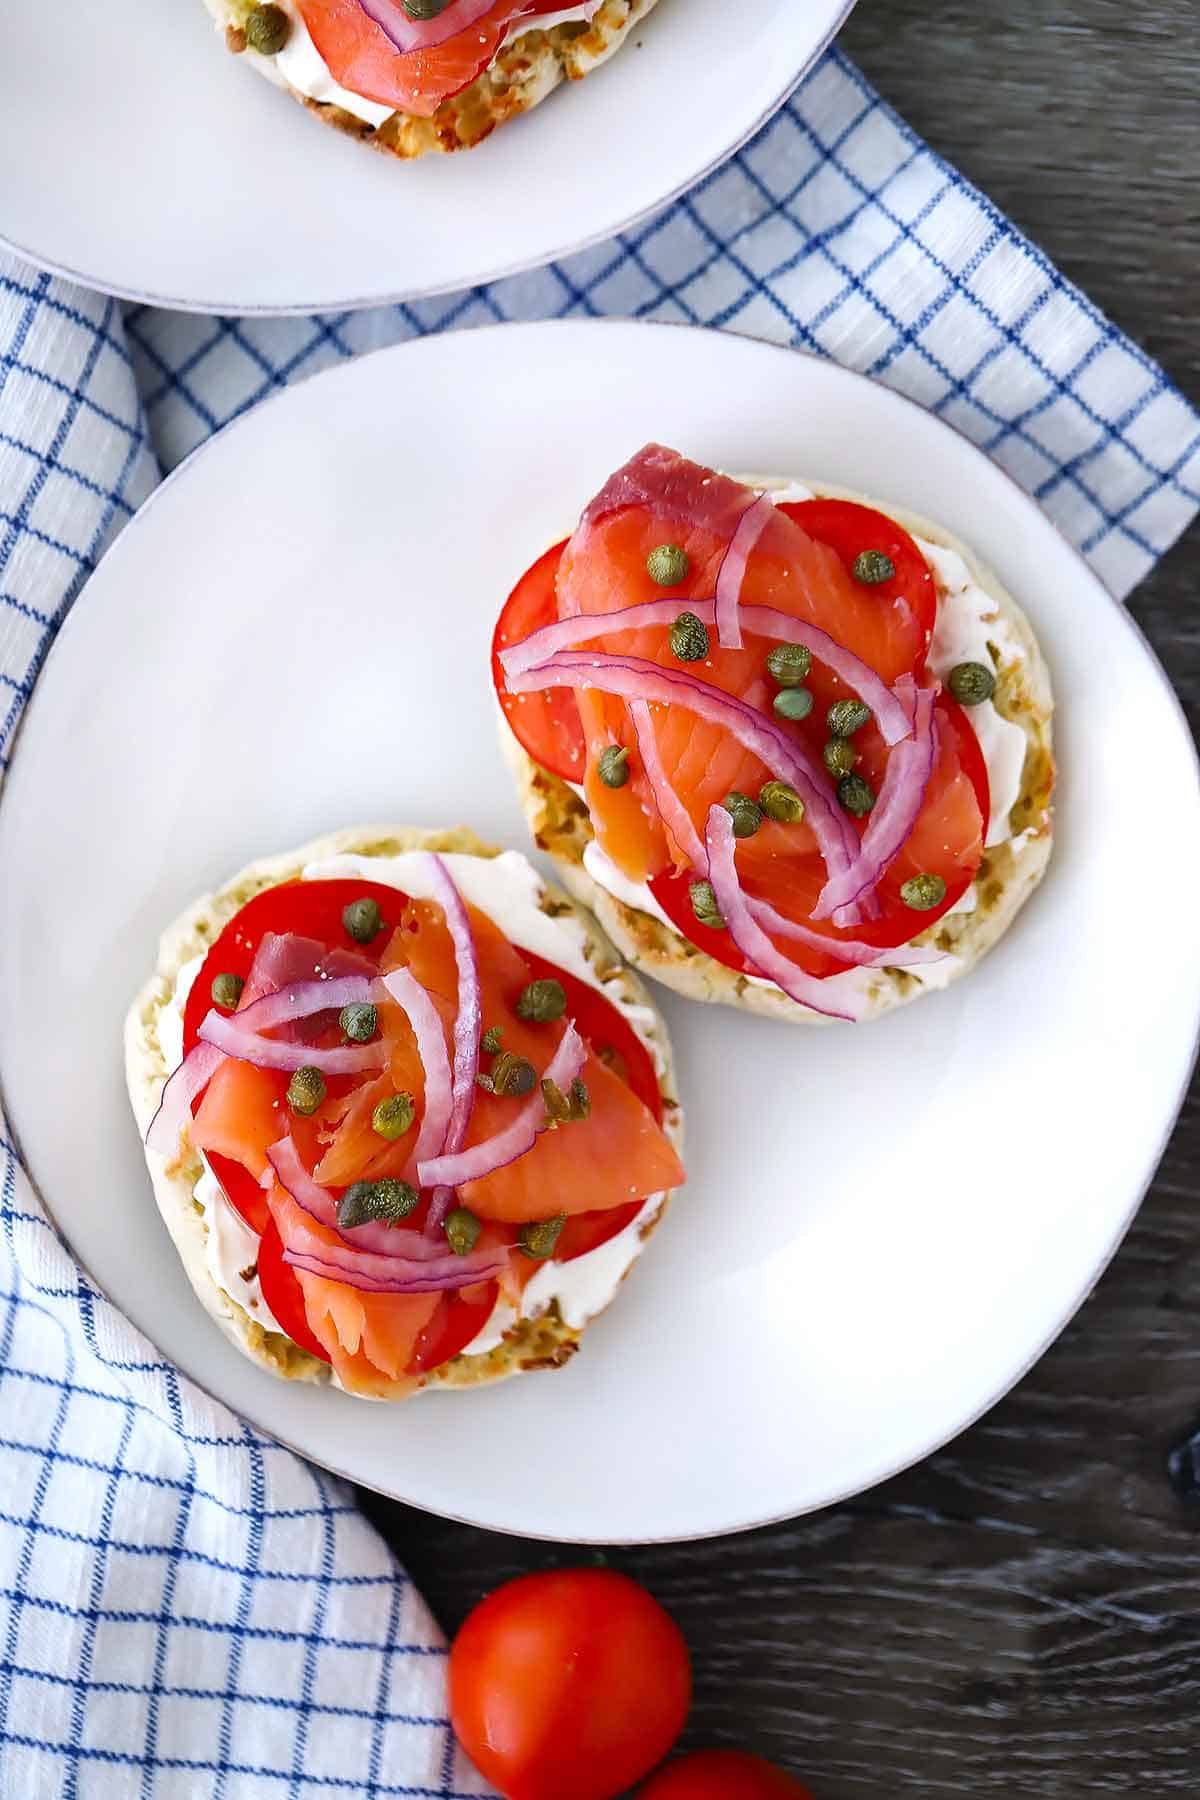 Overhead photo of a smoked salmon english muffin with cream cheese, capers, tomatoes, and red onion